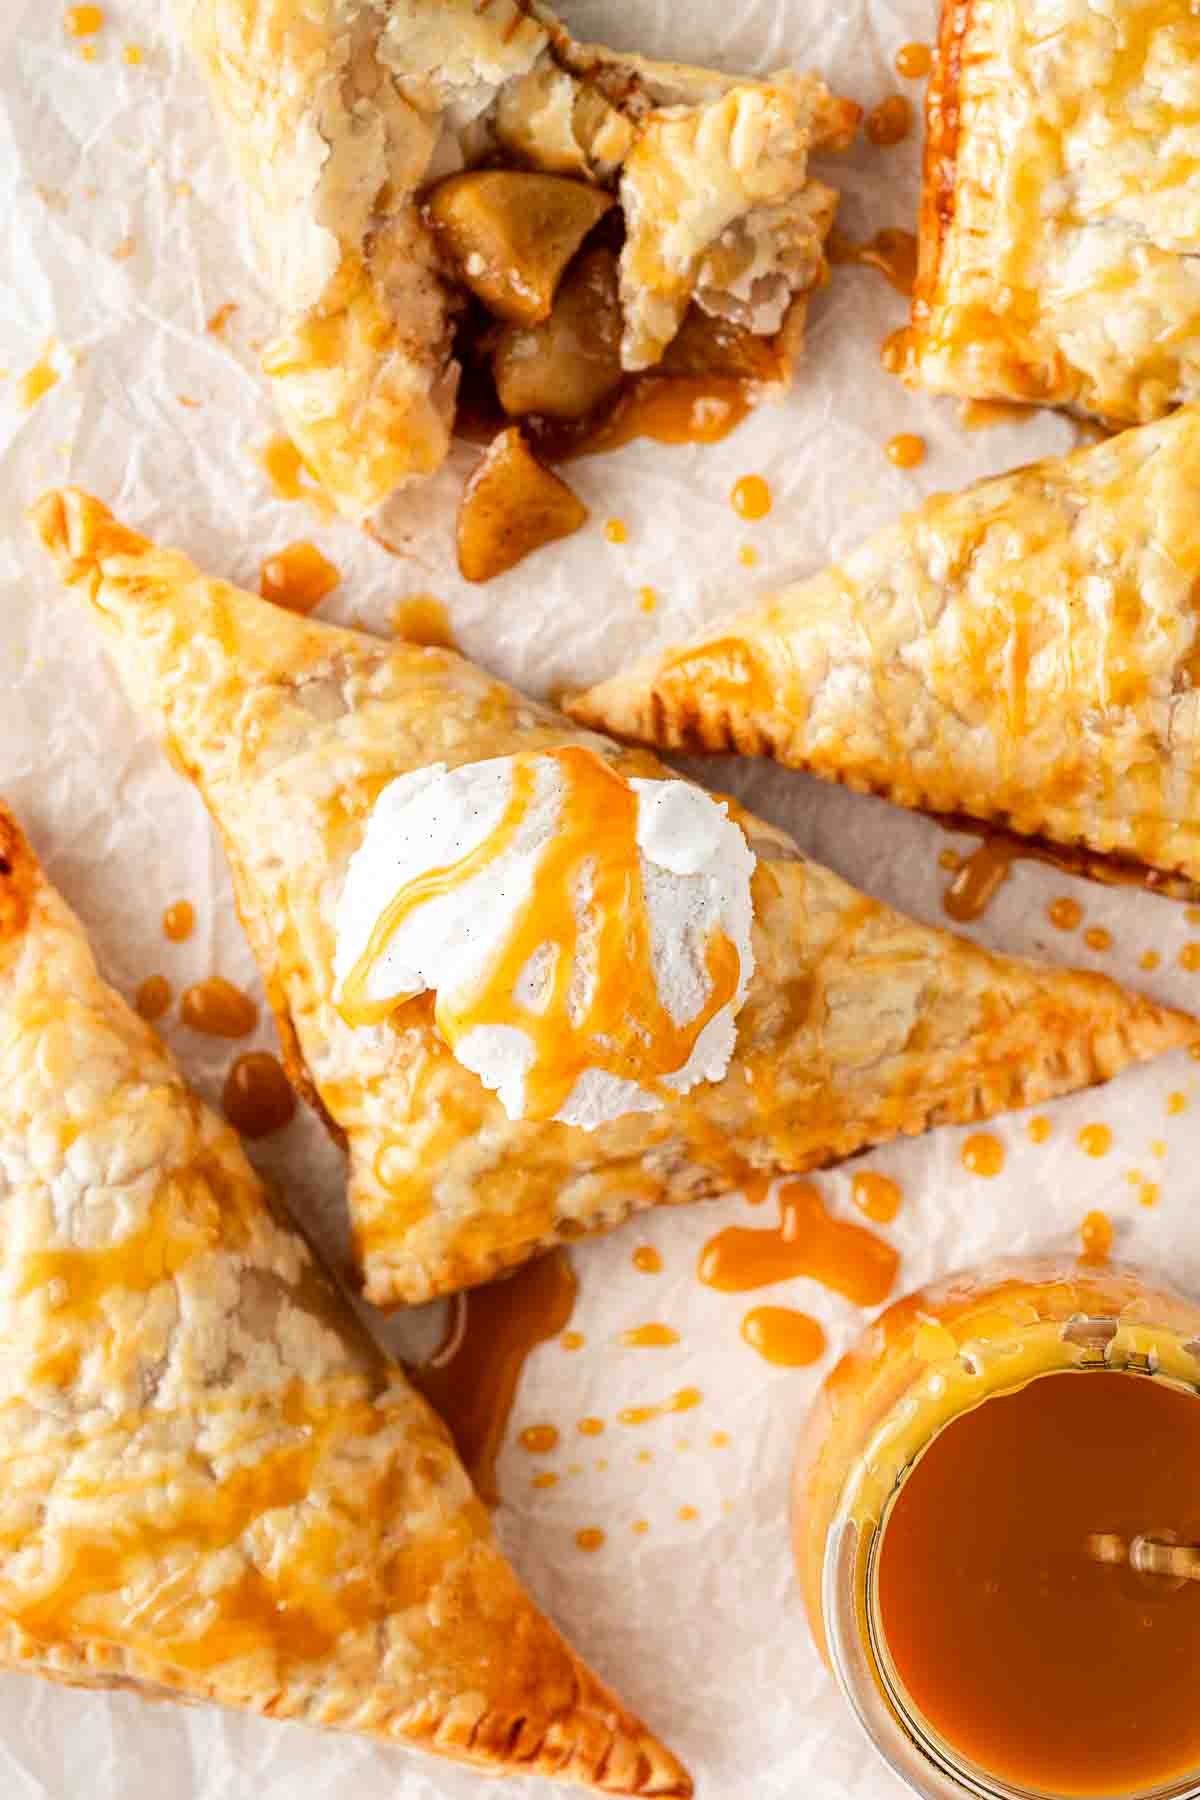 Apple turnovers on a plate with ice cream and caramel sauce.